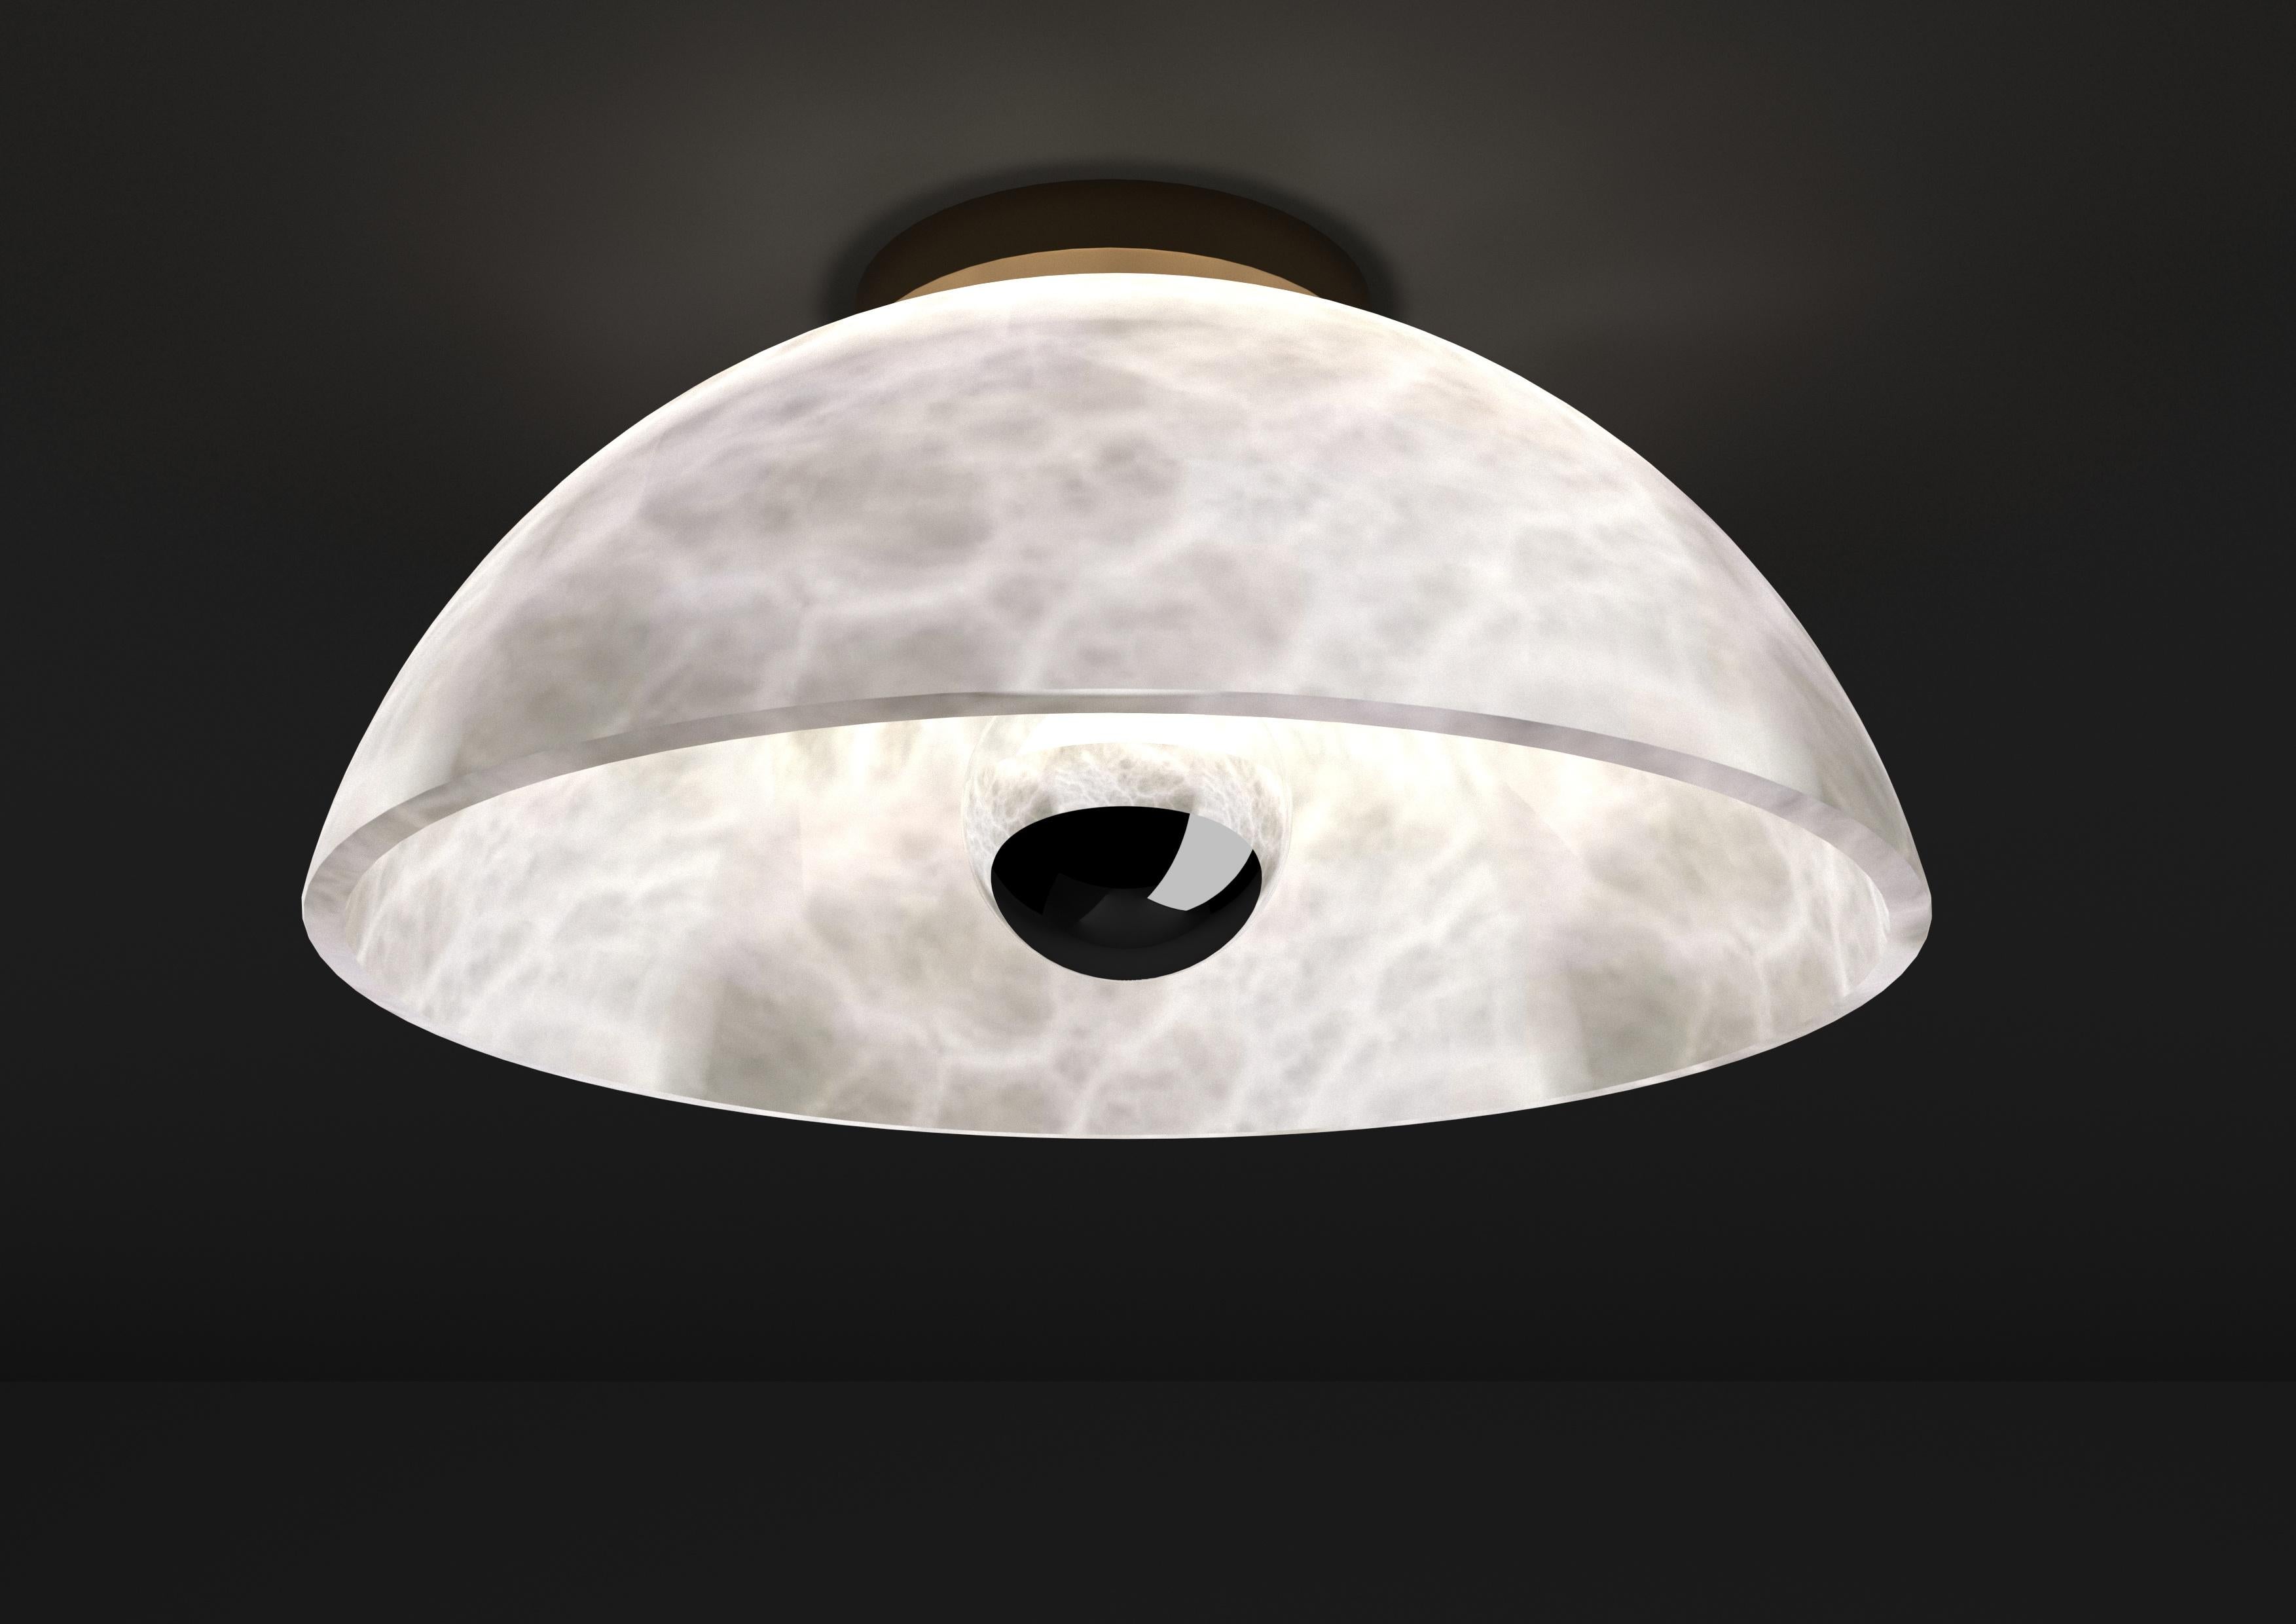 Apollo Bronze Ceiling Lamp by Alabastro Italiano
Dimensions: Ø 30 x W 17,5 cm.
Materials: White alabaster and bronze.

Available in different finishes: Shiny Silver, Bronze, Brushed Brass, Ruggine of Florence, Brushed Burnished, Shiny Gold, Brushed